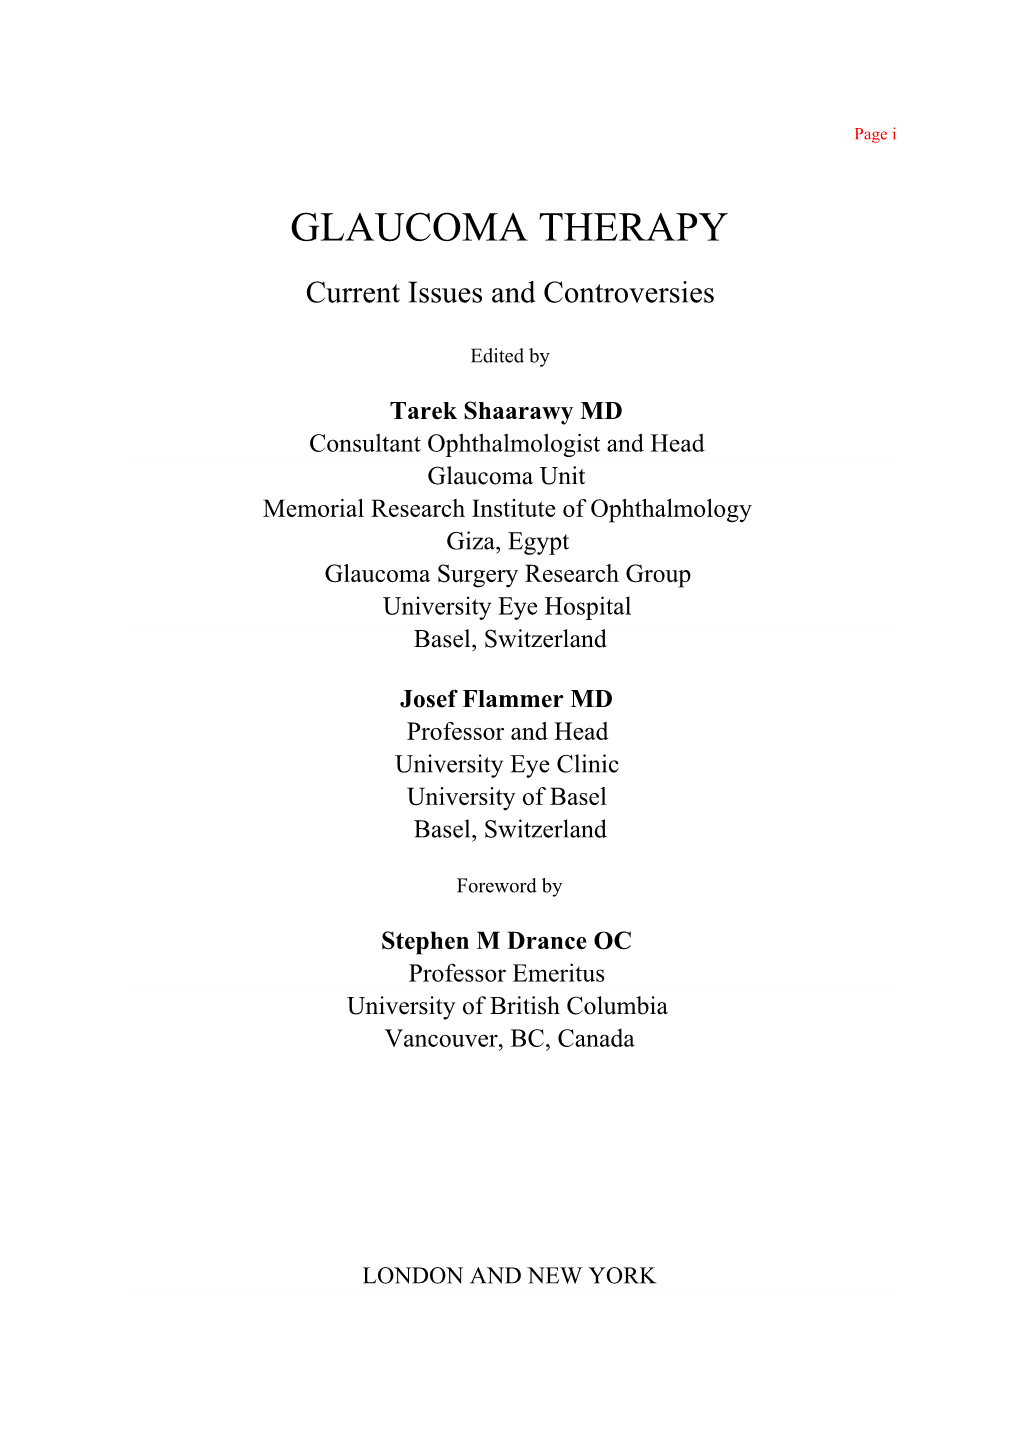 GLAUCOMA THERAPY Current Issues and Controversies